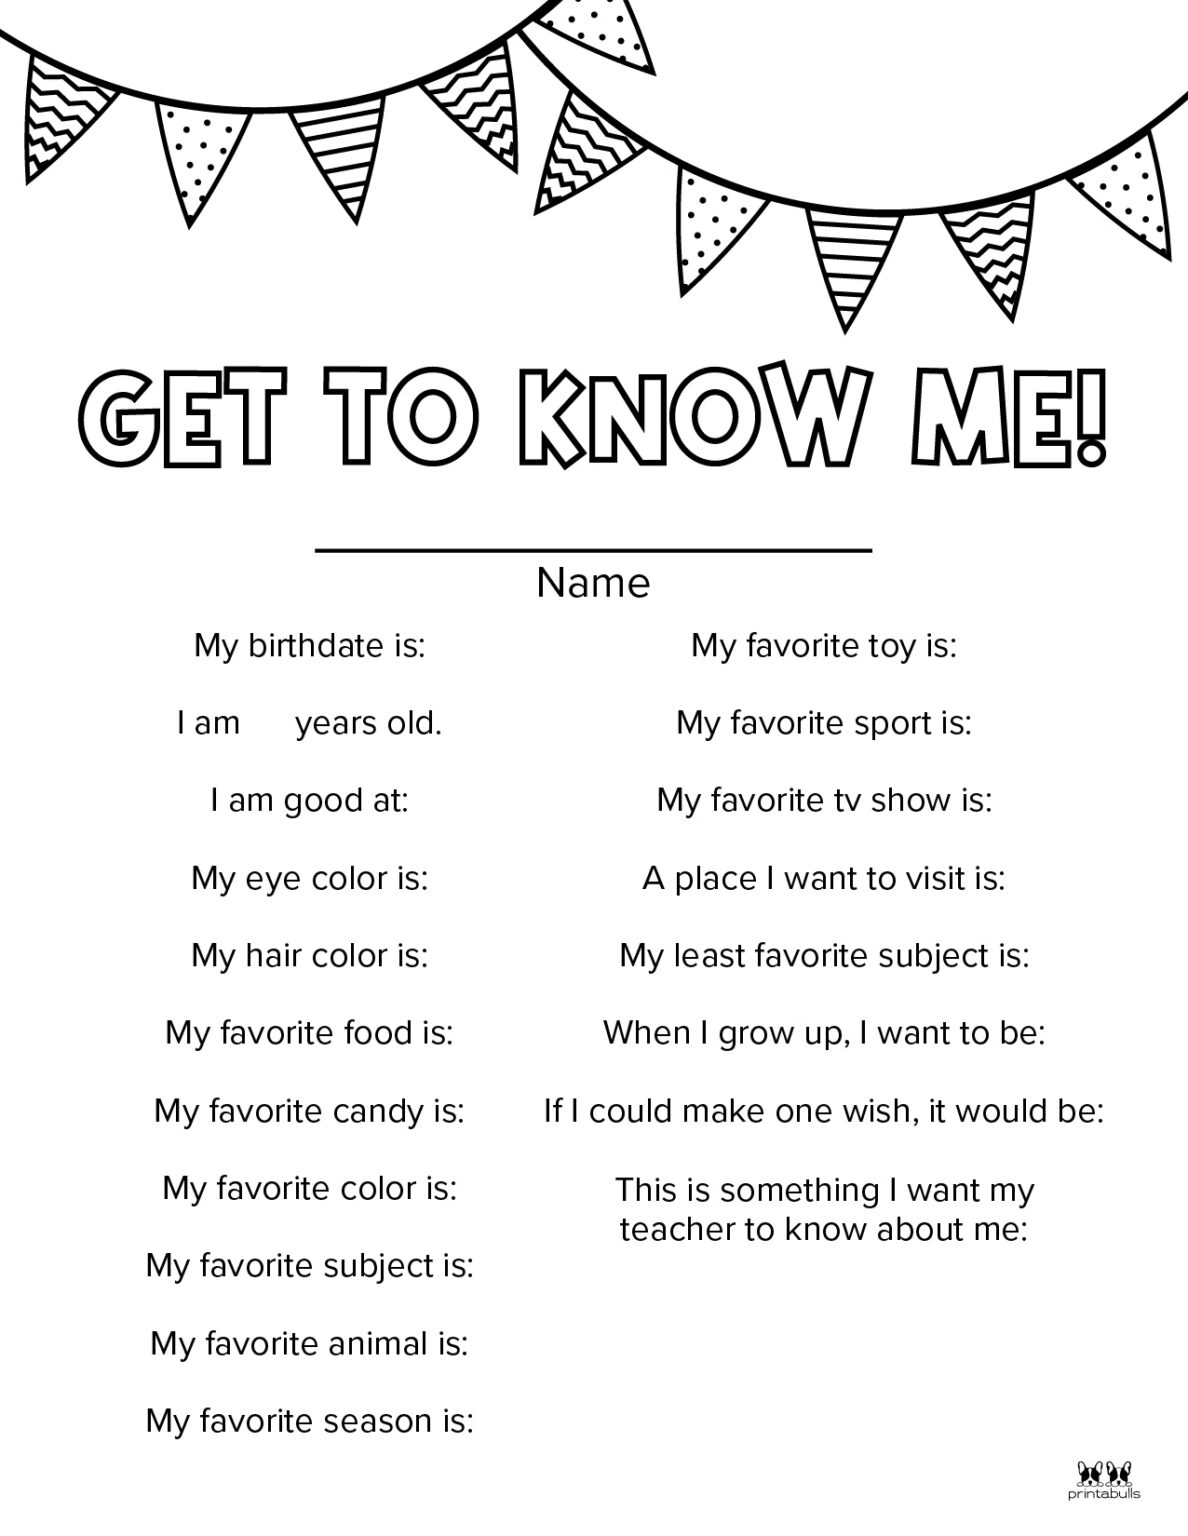 50 All About Me Worksheet 4